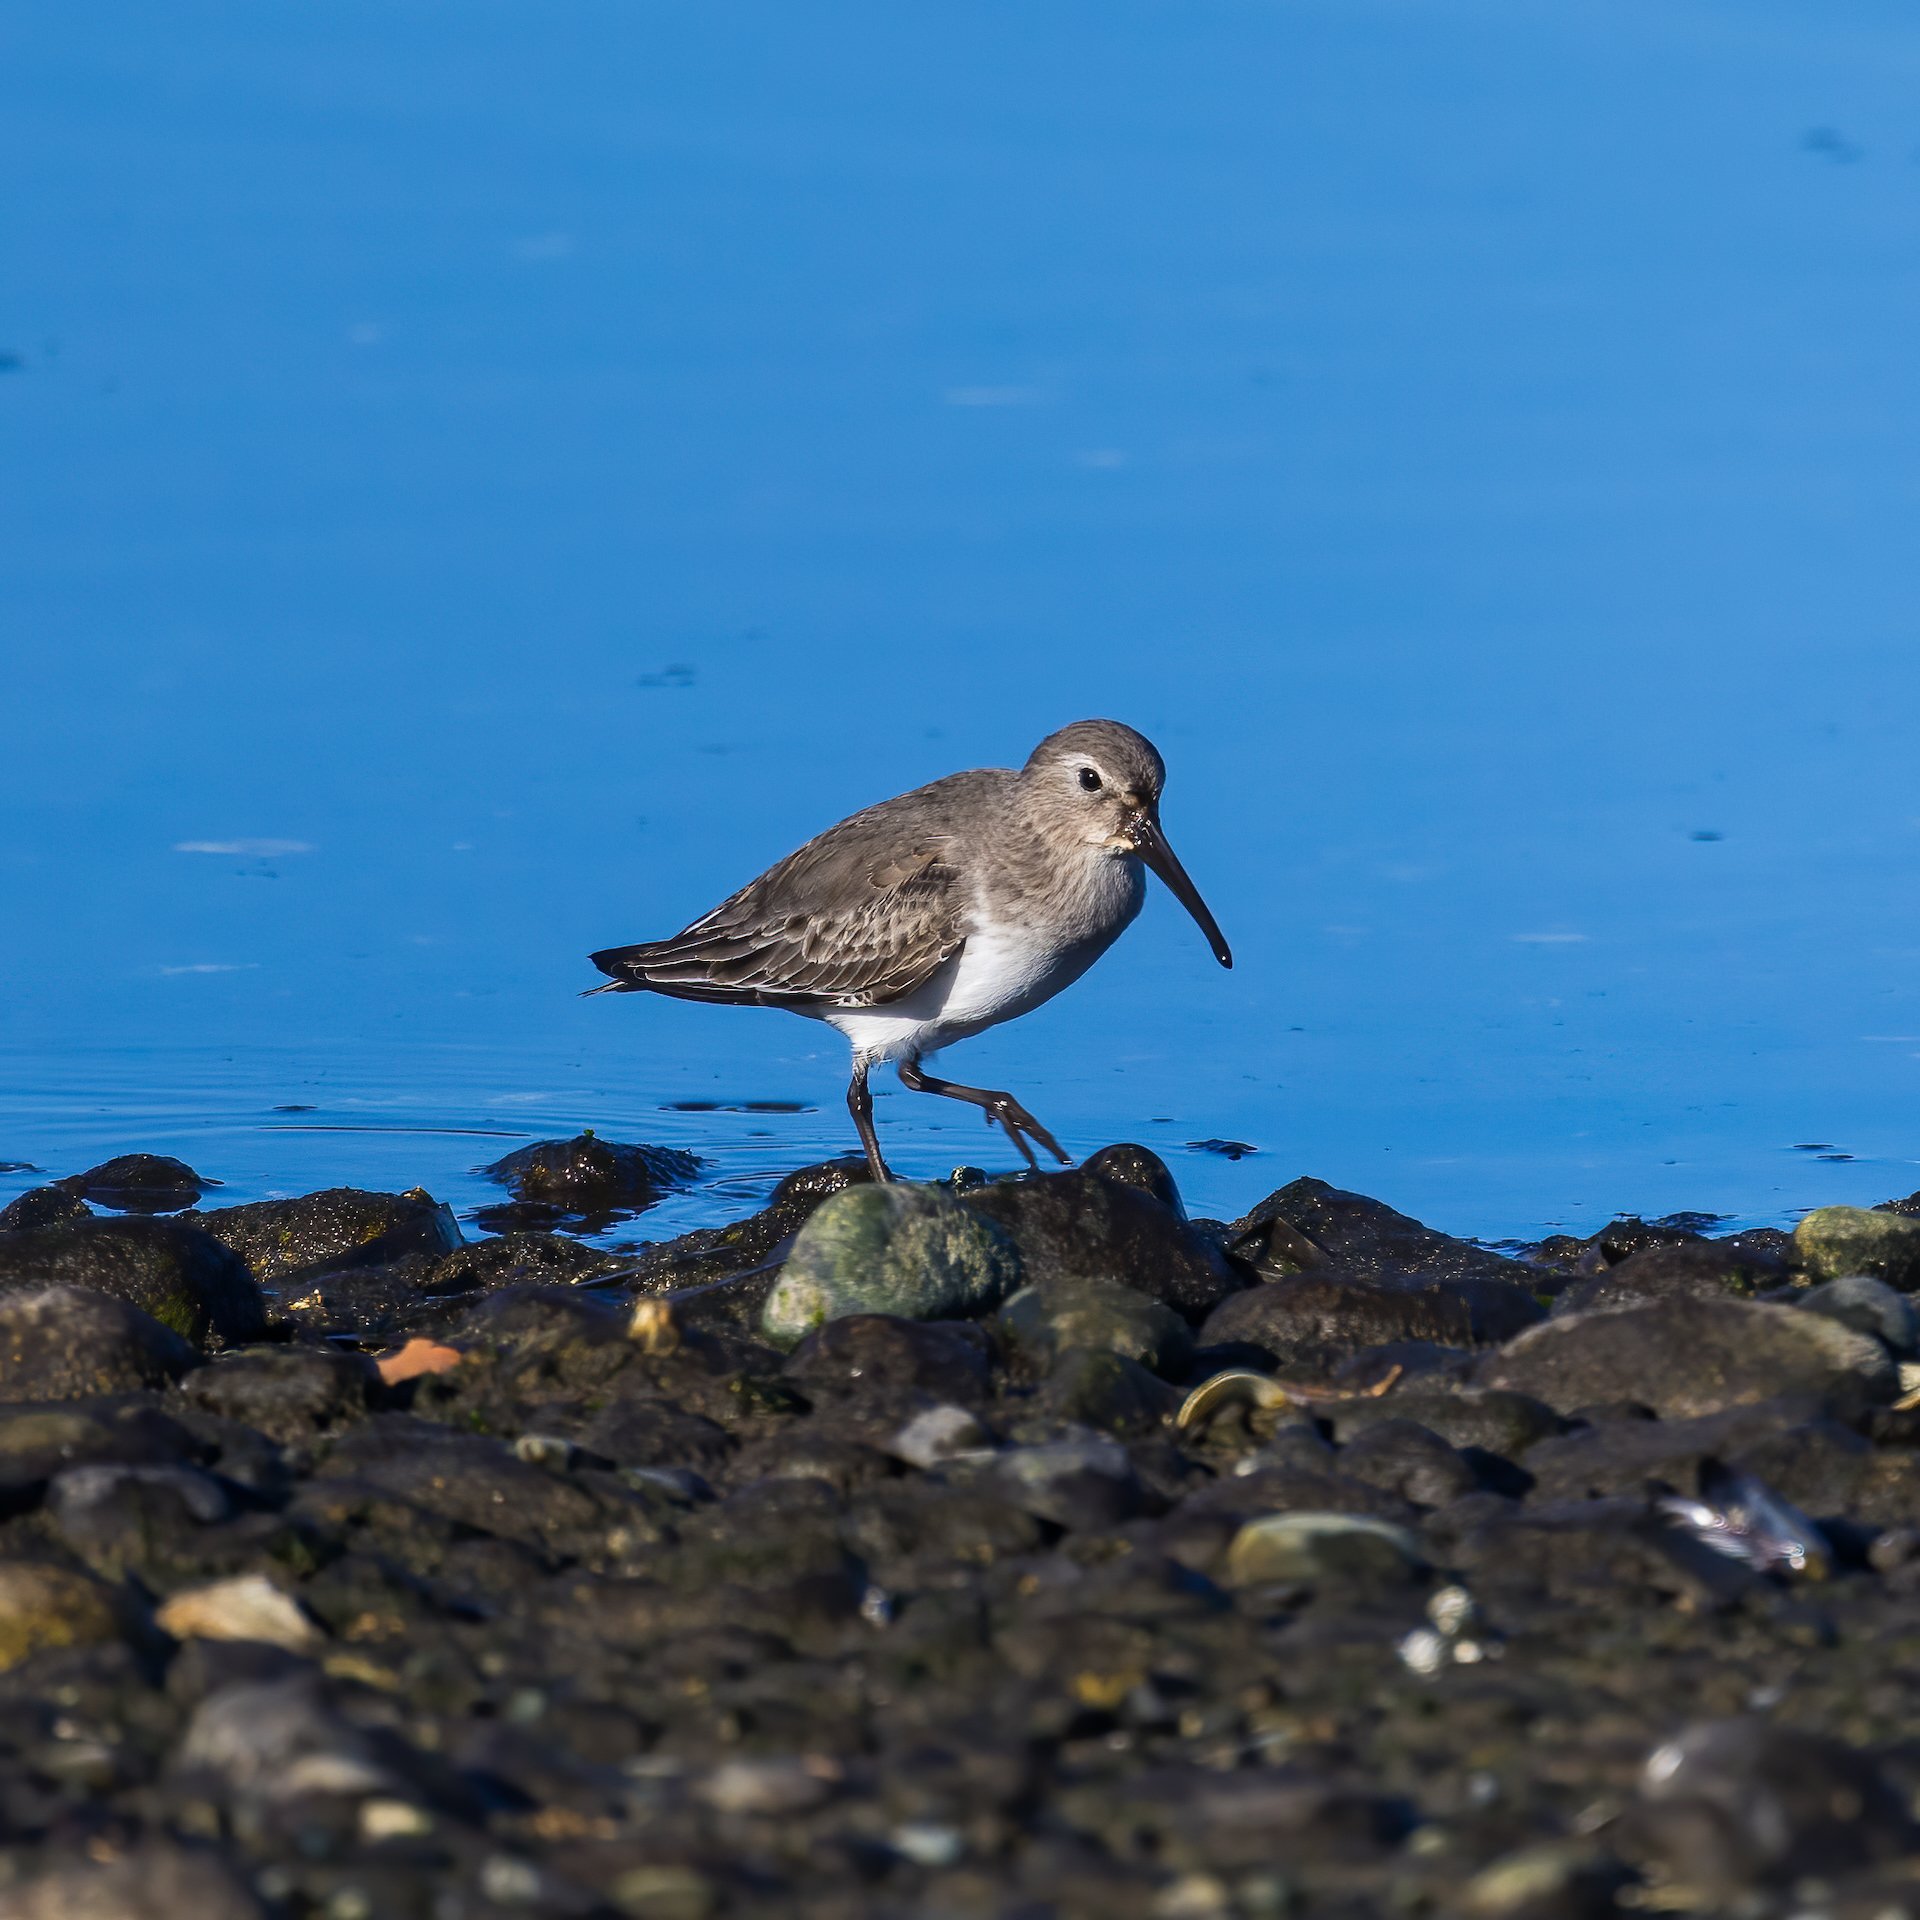  This was a new species - I think it’s a Dunlin.  